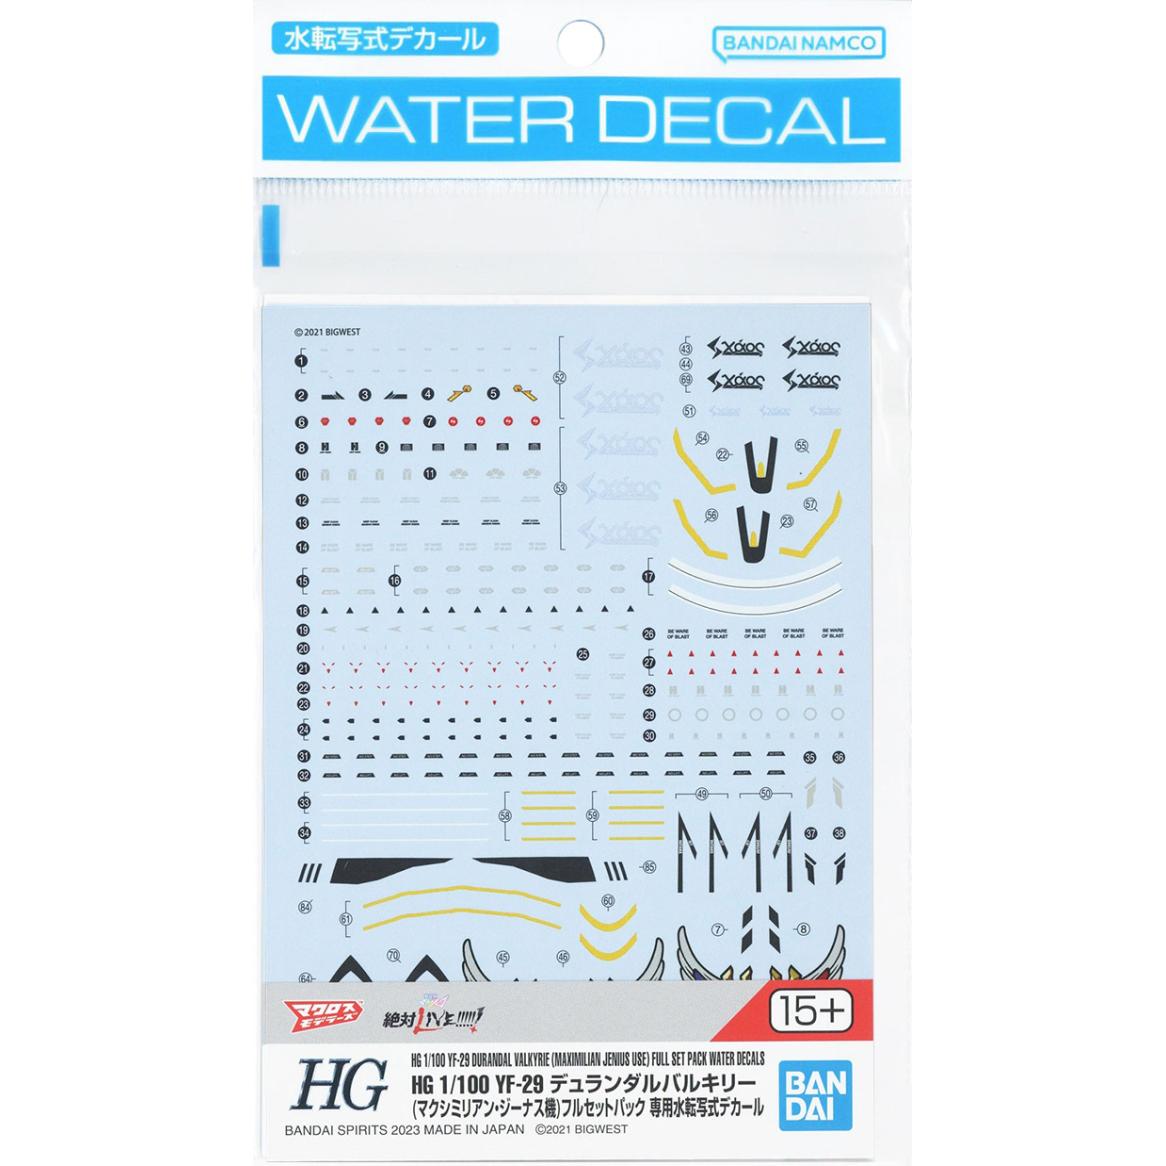 water_decal-hg-yf-29_max_full-package